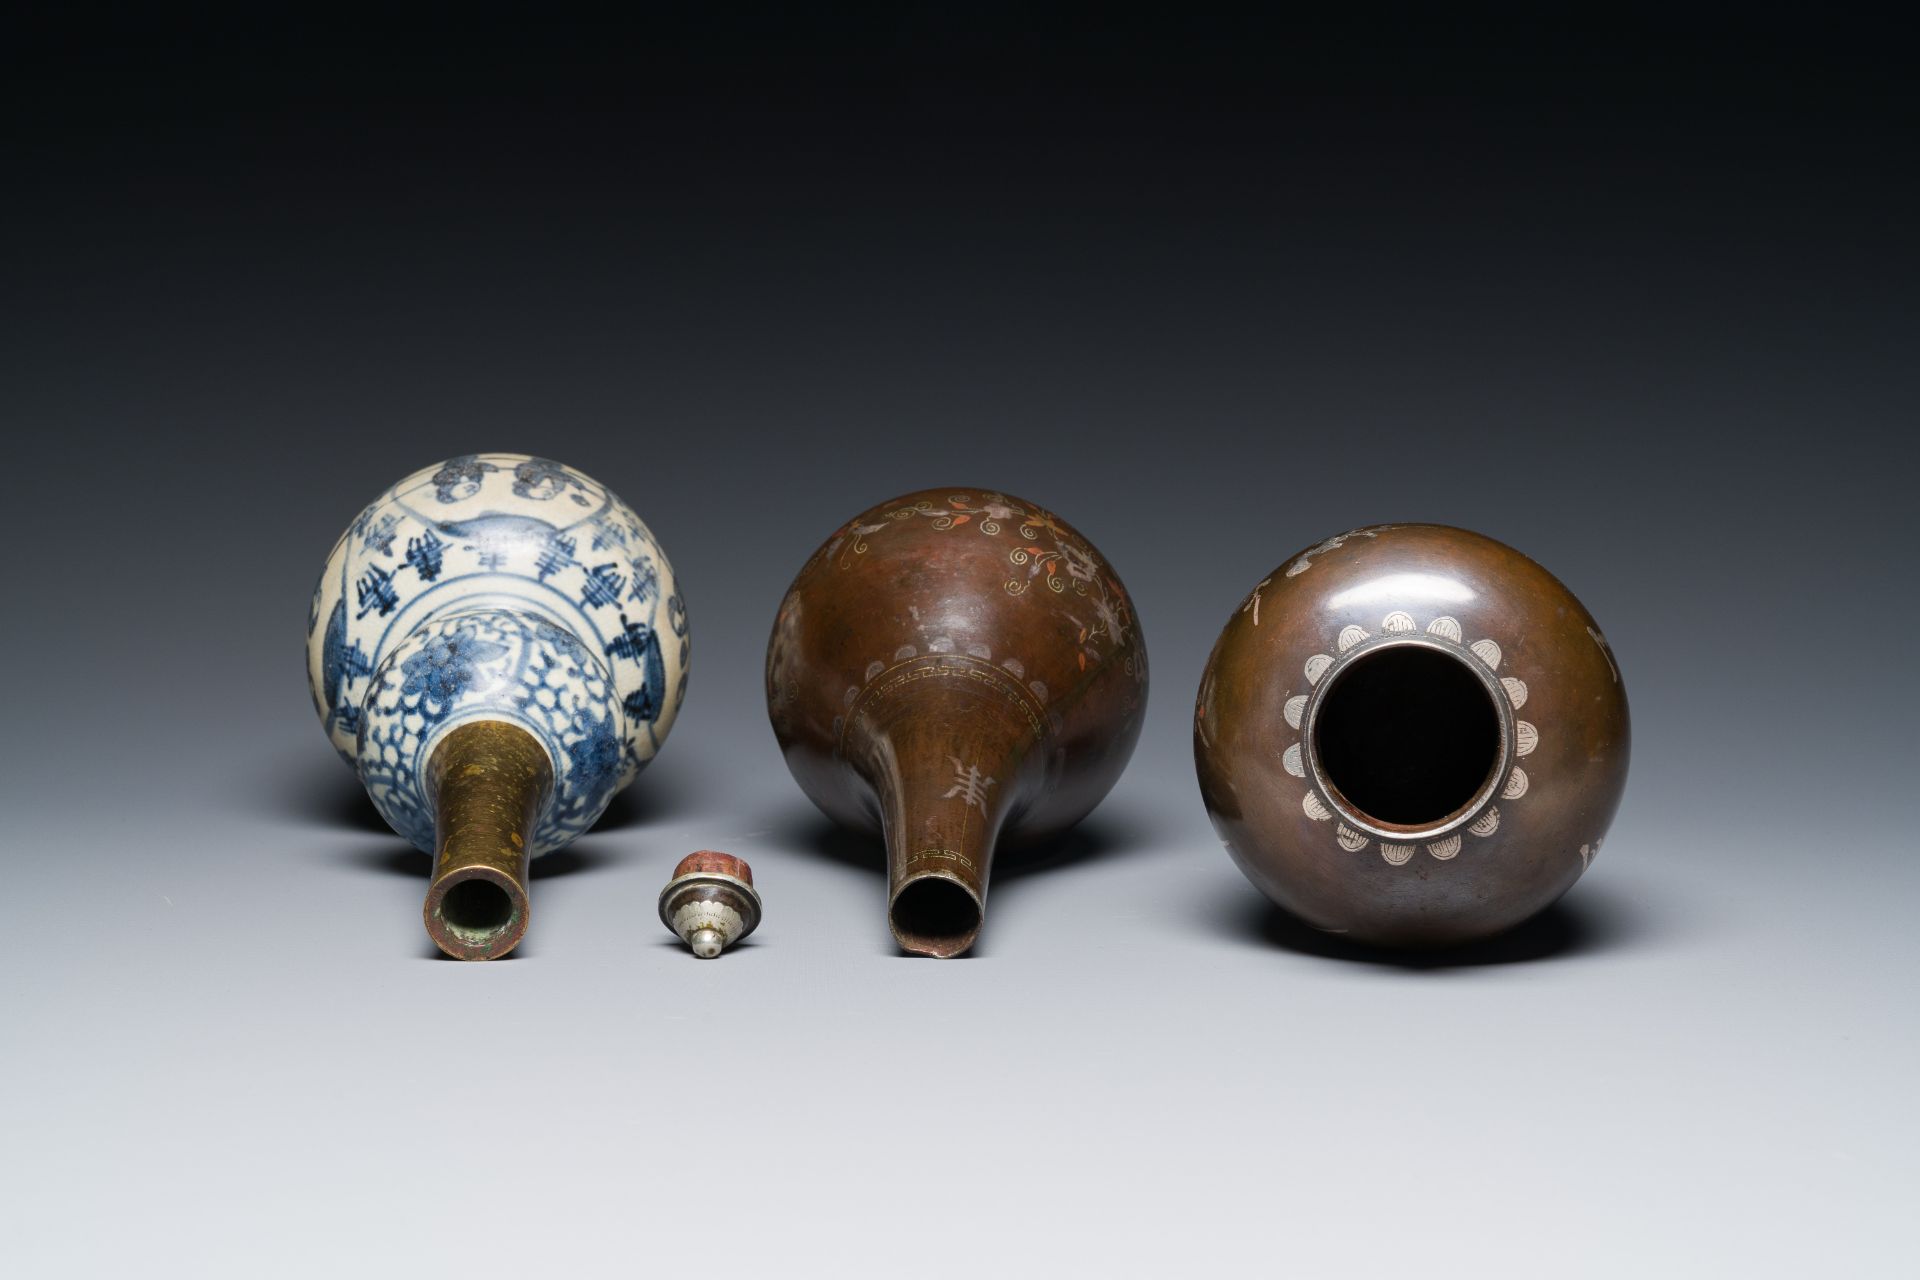 Two Vietnamese copper- and silver-inlaid paktong wares and a Chinese blue and white double gourd vas - Image 6 of 7